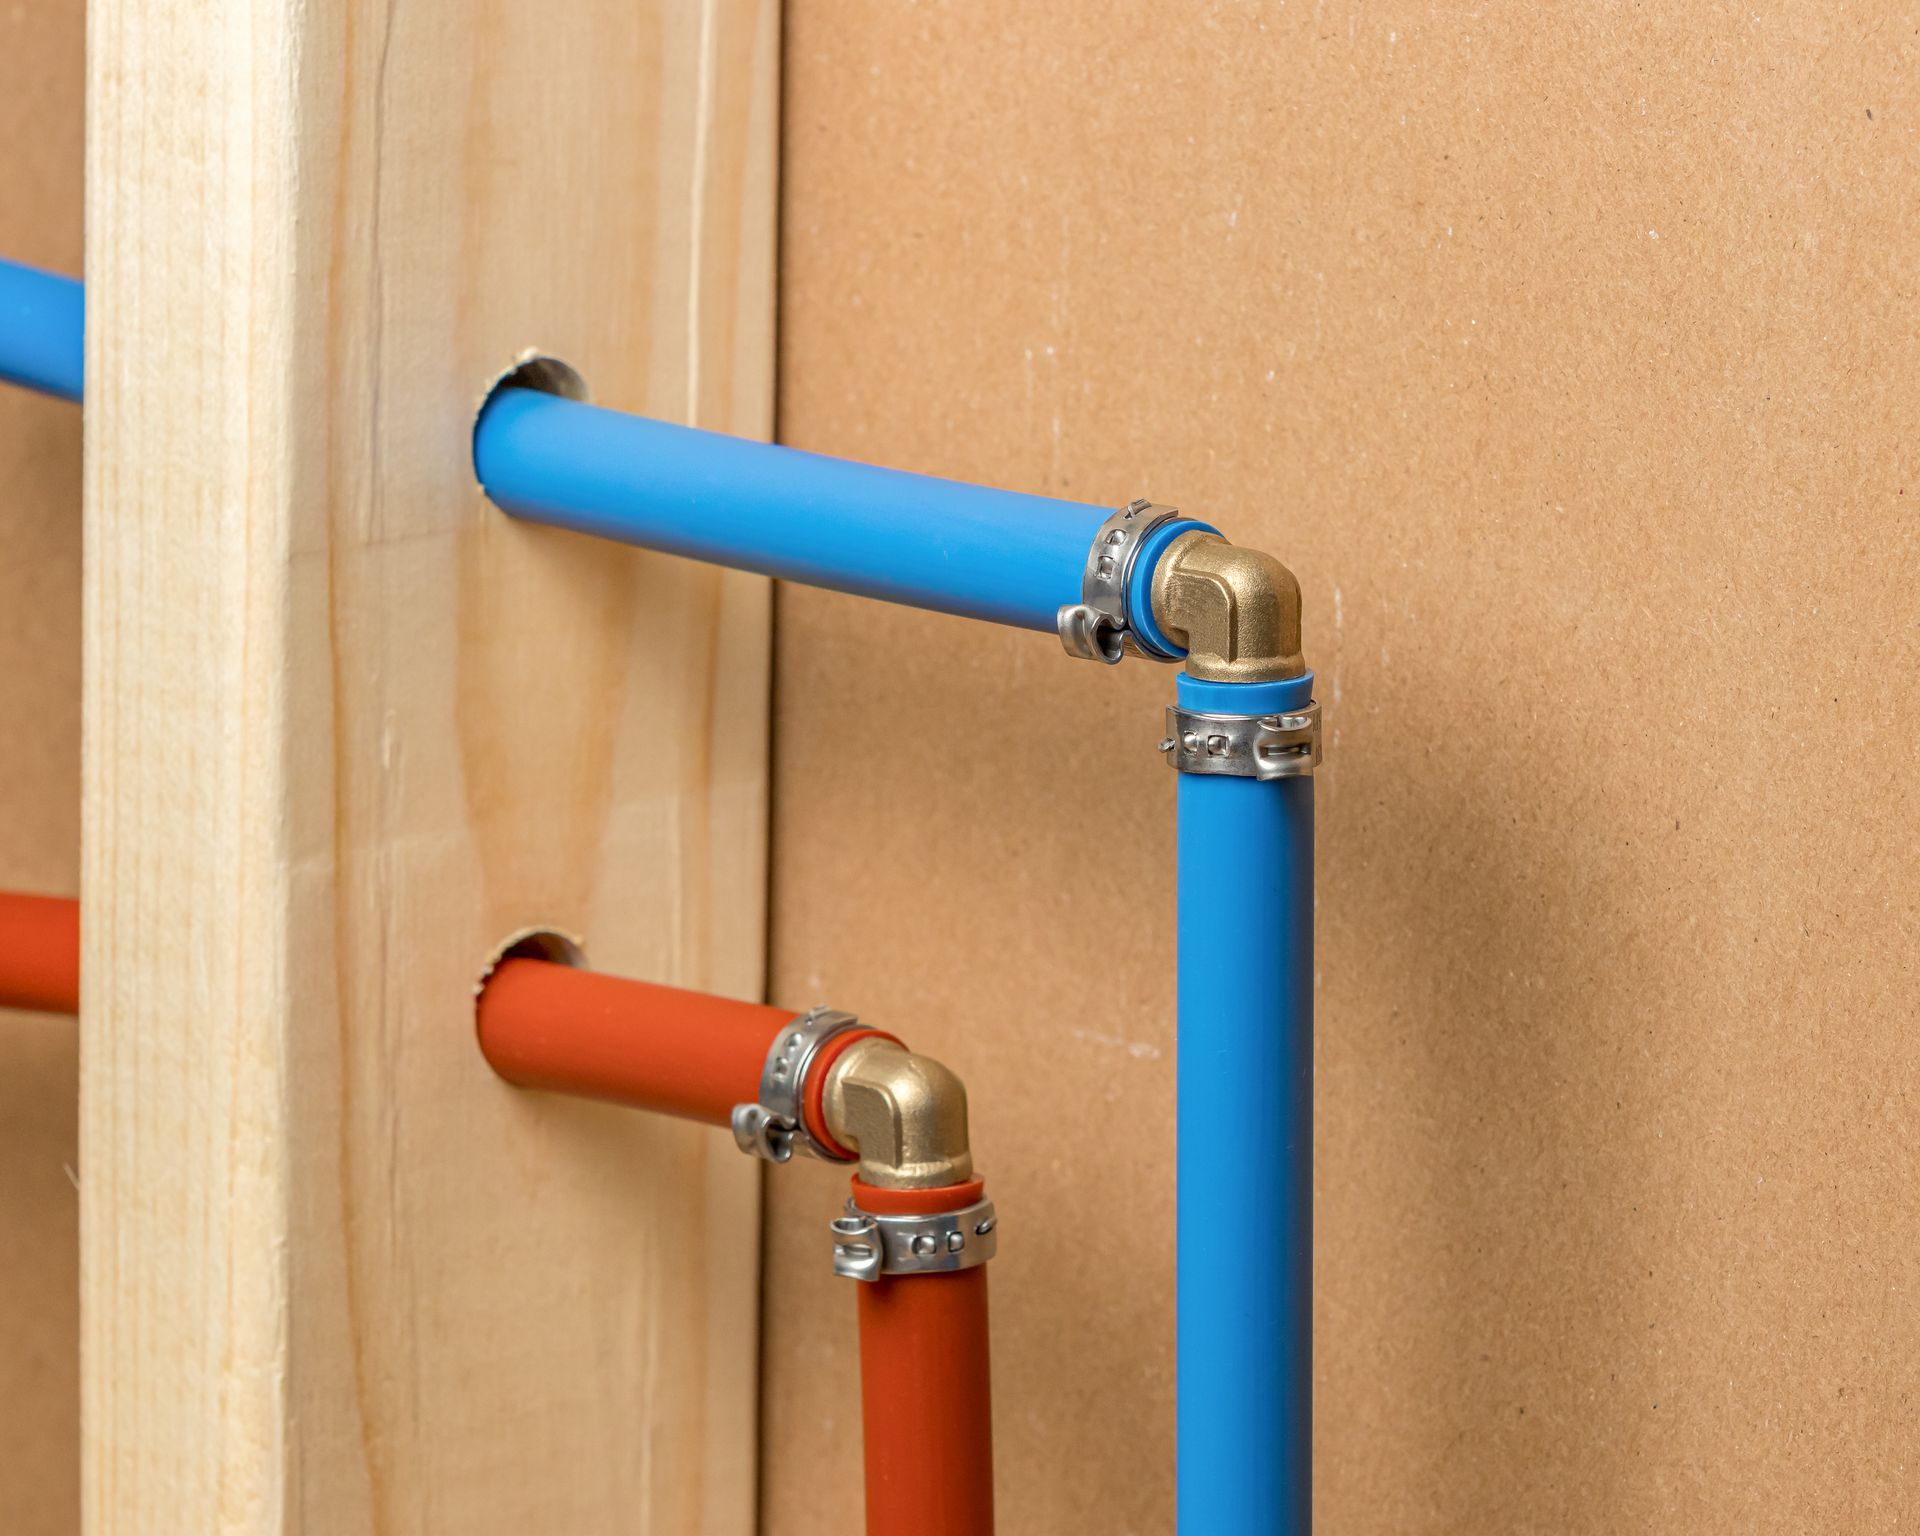 PEX plastic water supply plumbing pipe installed within a wall of a house.